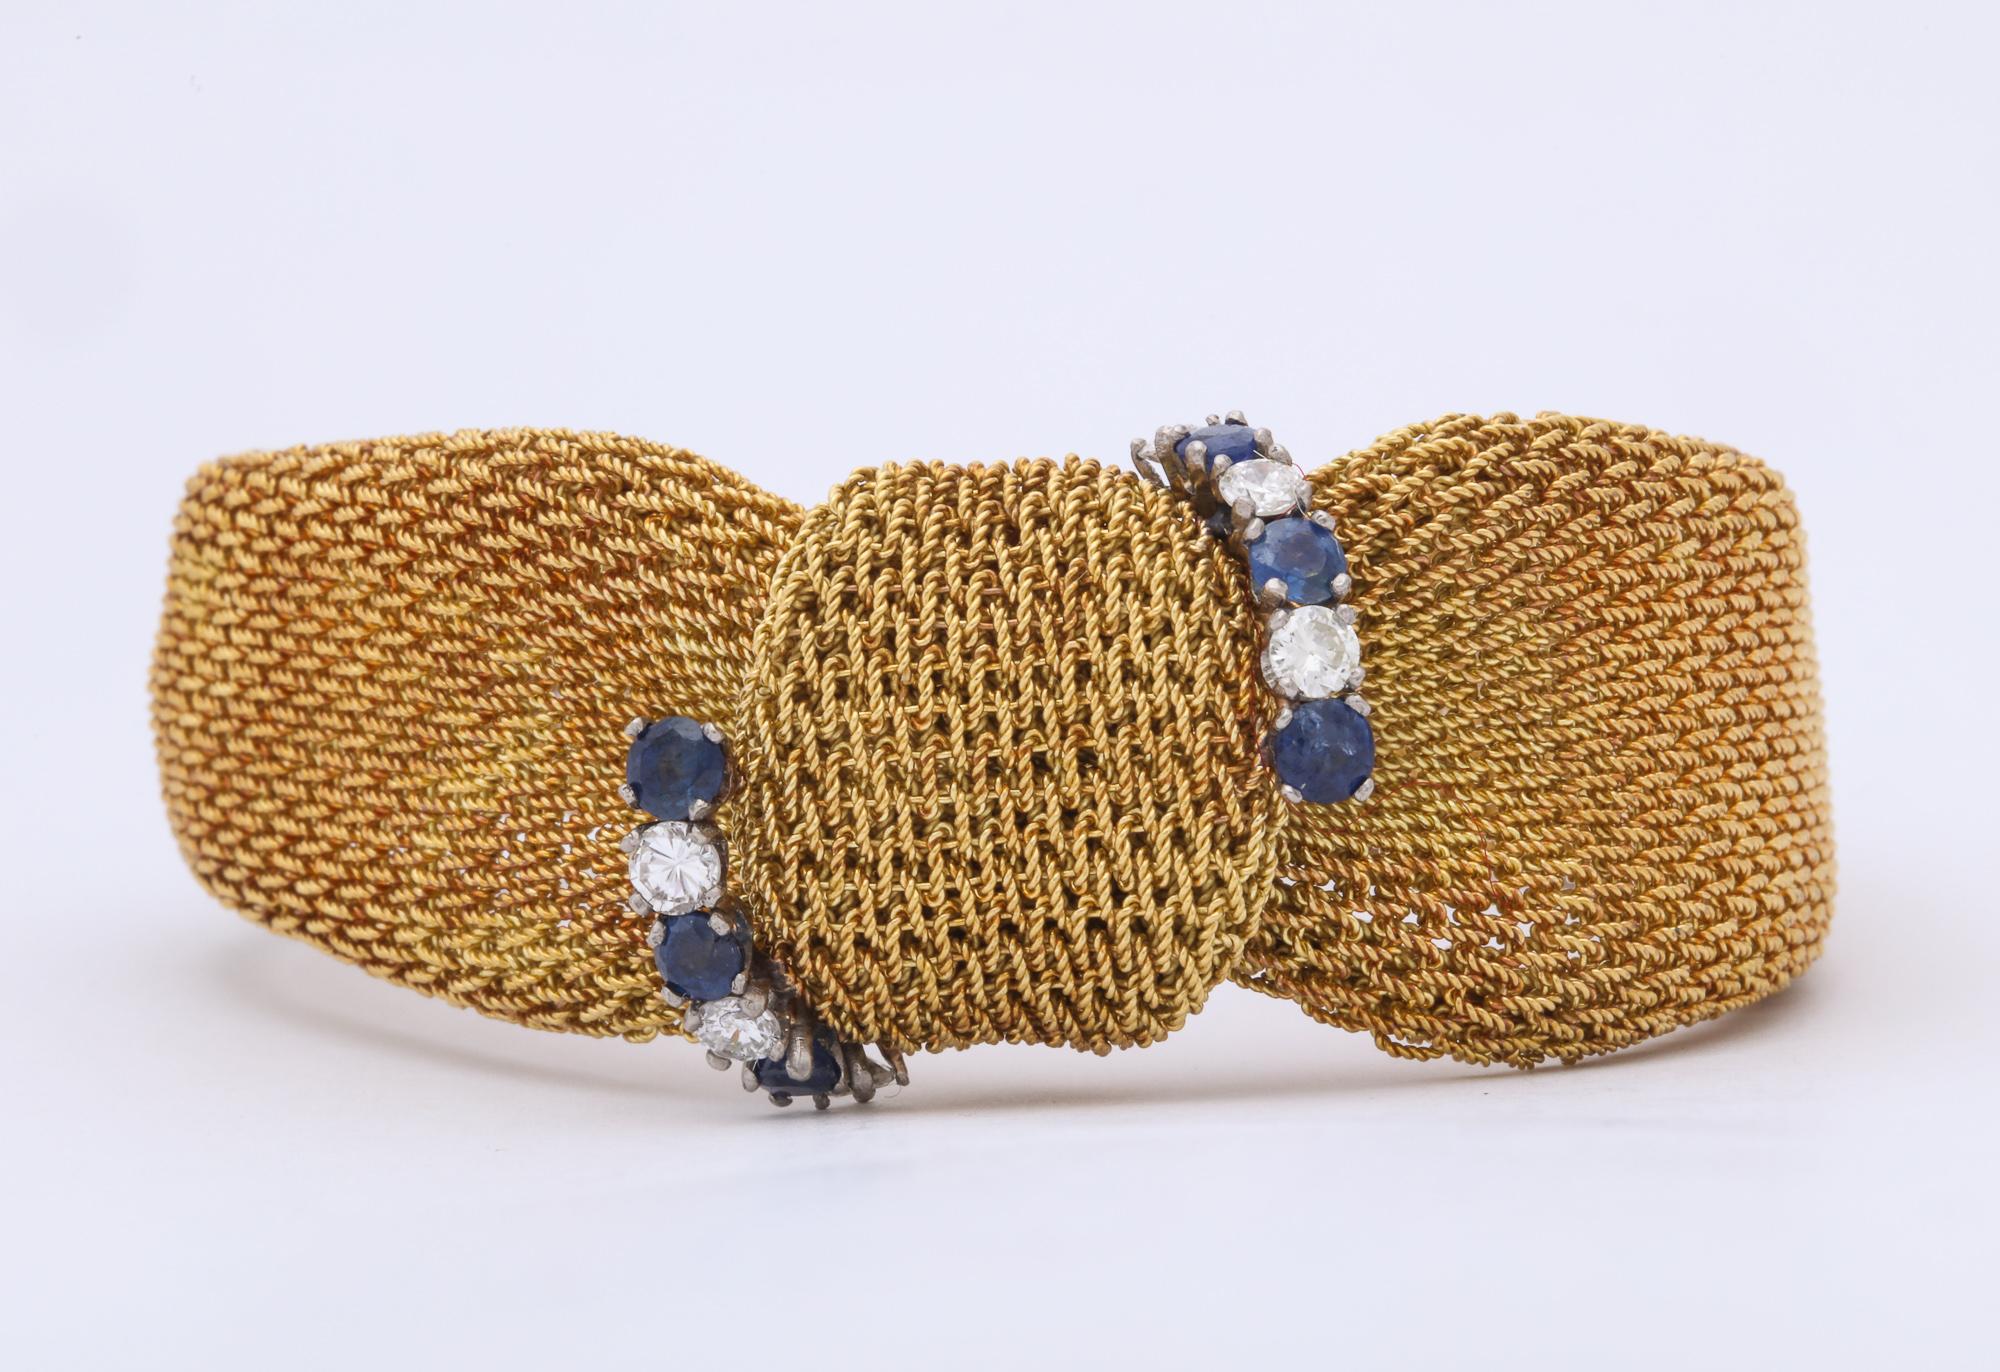 One Ladies 18kt Gold Textured,Ridged Gold Mesh Bracelet In Form Of A Modified Bow Design. Mesh Bracelet Is Embellished With Six High Quality Full Cut Diamonds Weighing Approximately 1.50 Cts Total weight. Mesh Bracelet Is Further Designed With Six